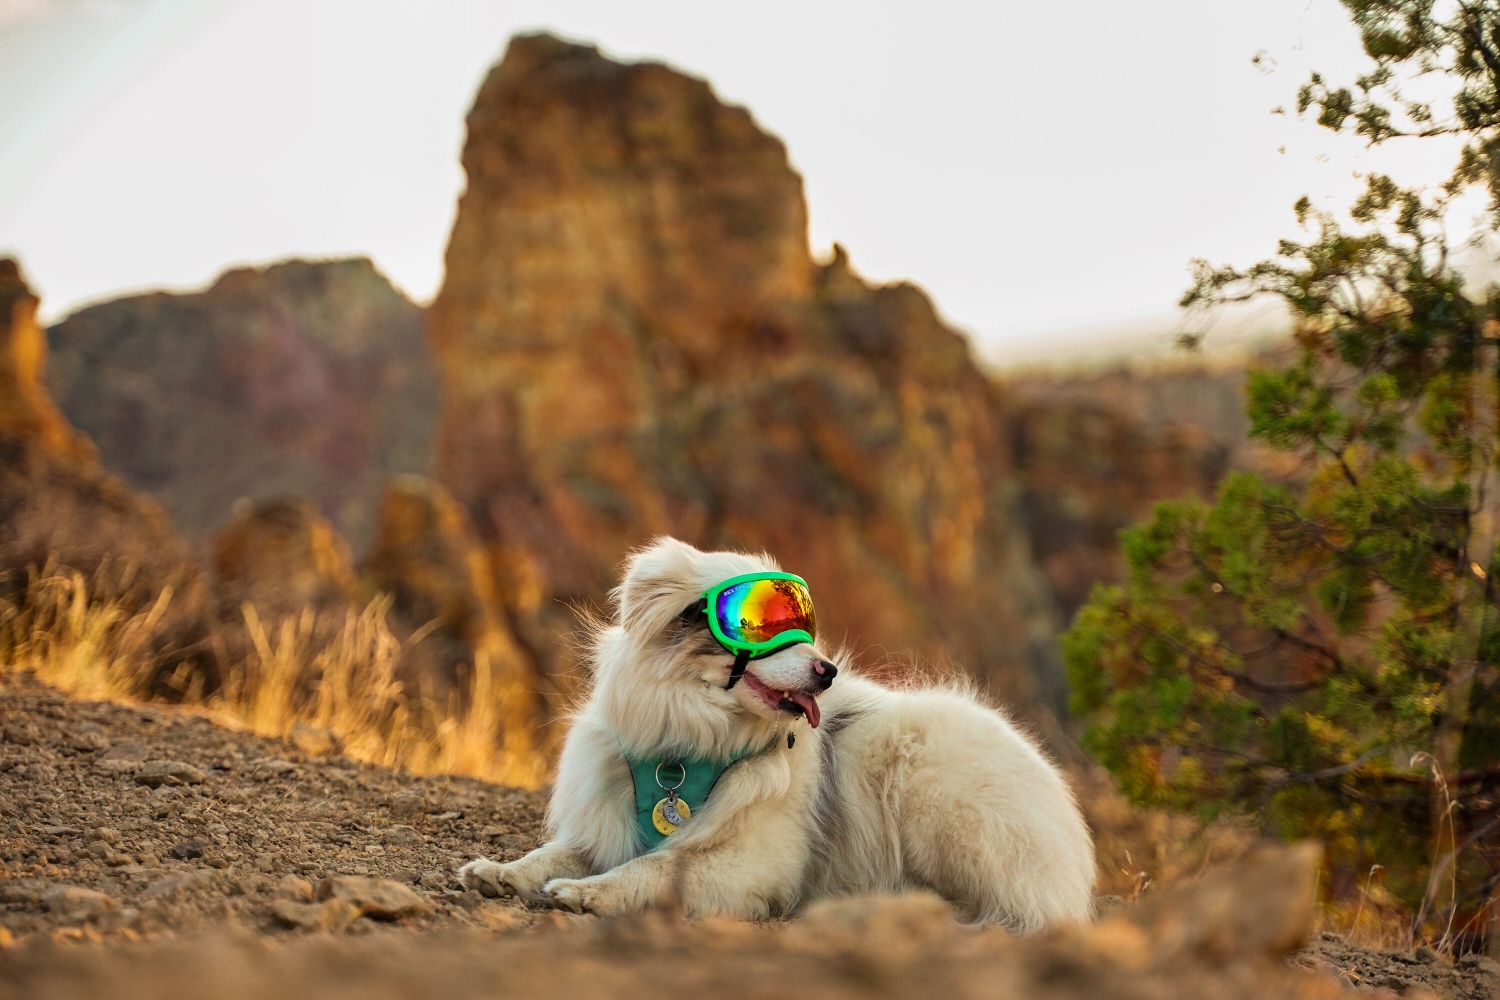 Hiking essentials for dogs with disabilities